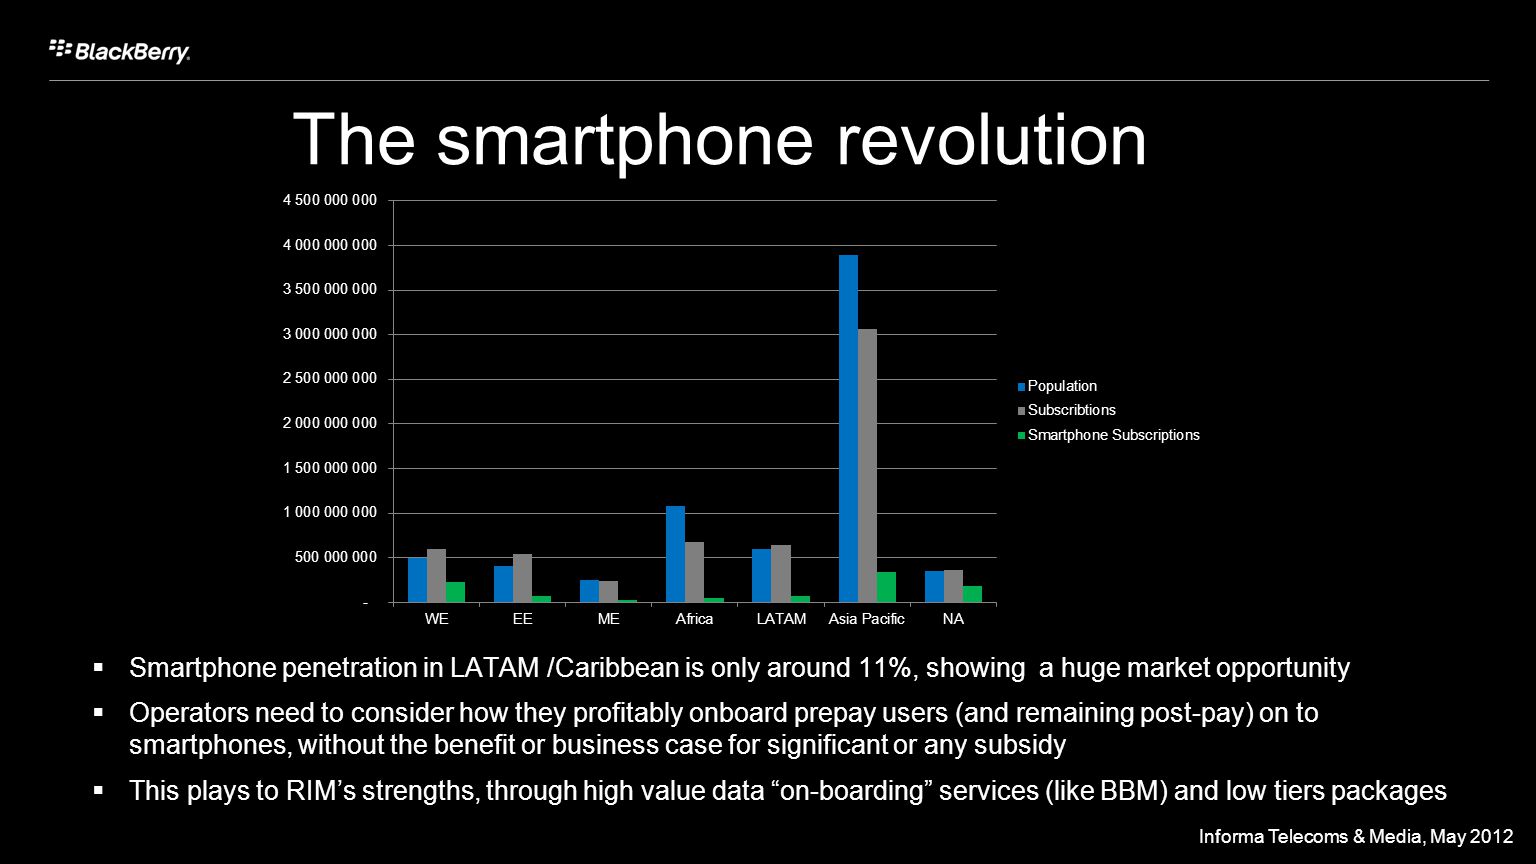 © 2012 Research In Motion Limited – RIM Confidential - Disclosed under NDA The smartphone revolution  Smartphone penetration in LATAM /Caribbean is only around 11%, showing a huge market opportunity  Operators need to consider how they profitably onboard prepay users (and remaining post-pay) on to smartphones, without the benefit or business case for significant or any subsidy  This plays to RIM’s strengths, through high value data on-boarding services (like BBM) and low tiers packages Informa Telecoms & Media, May 2012